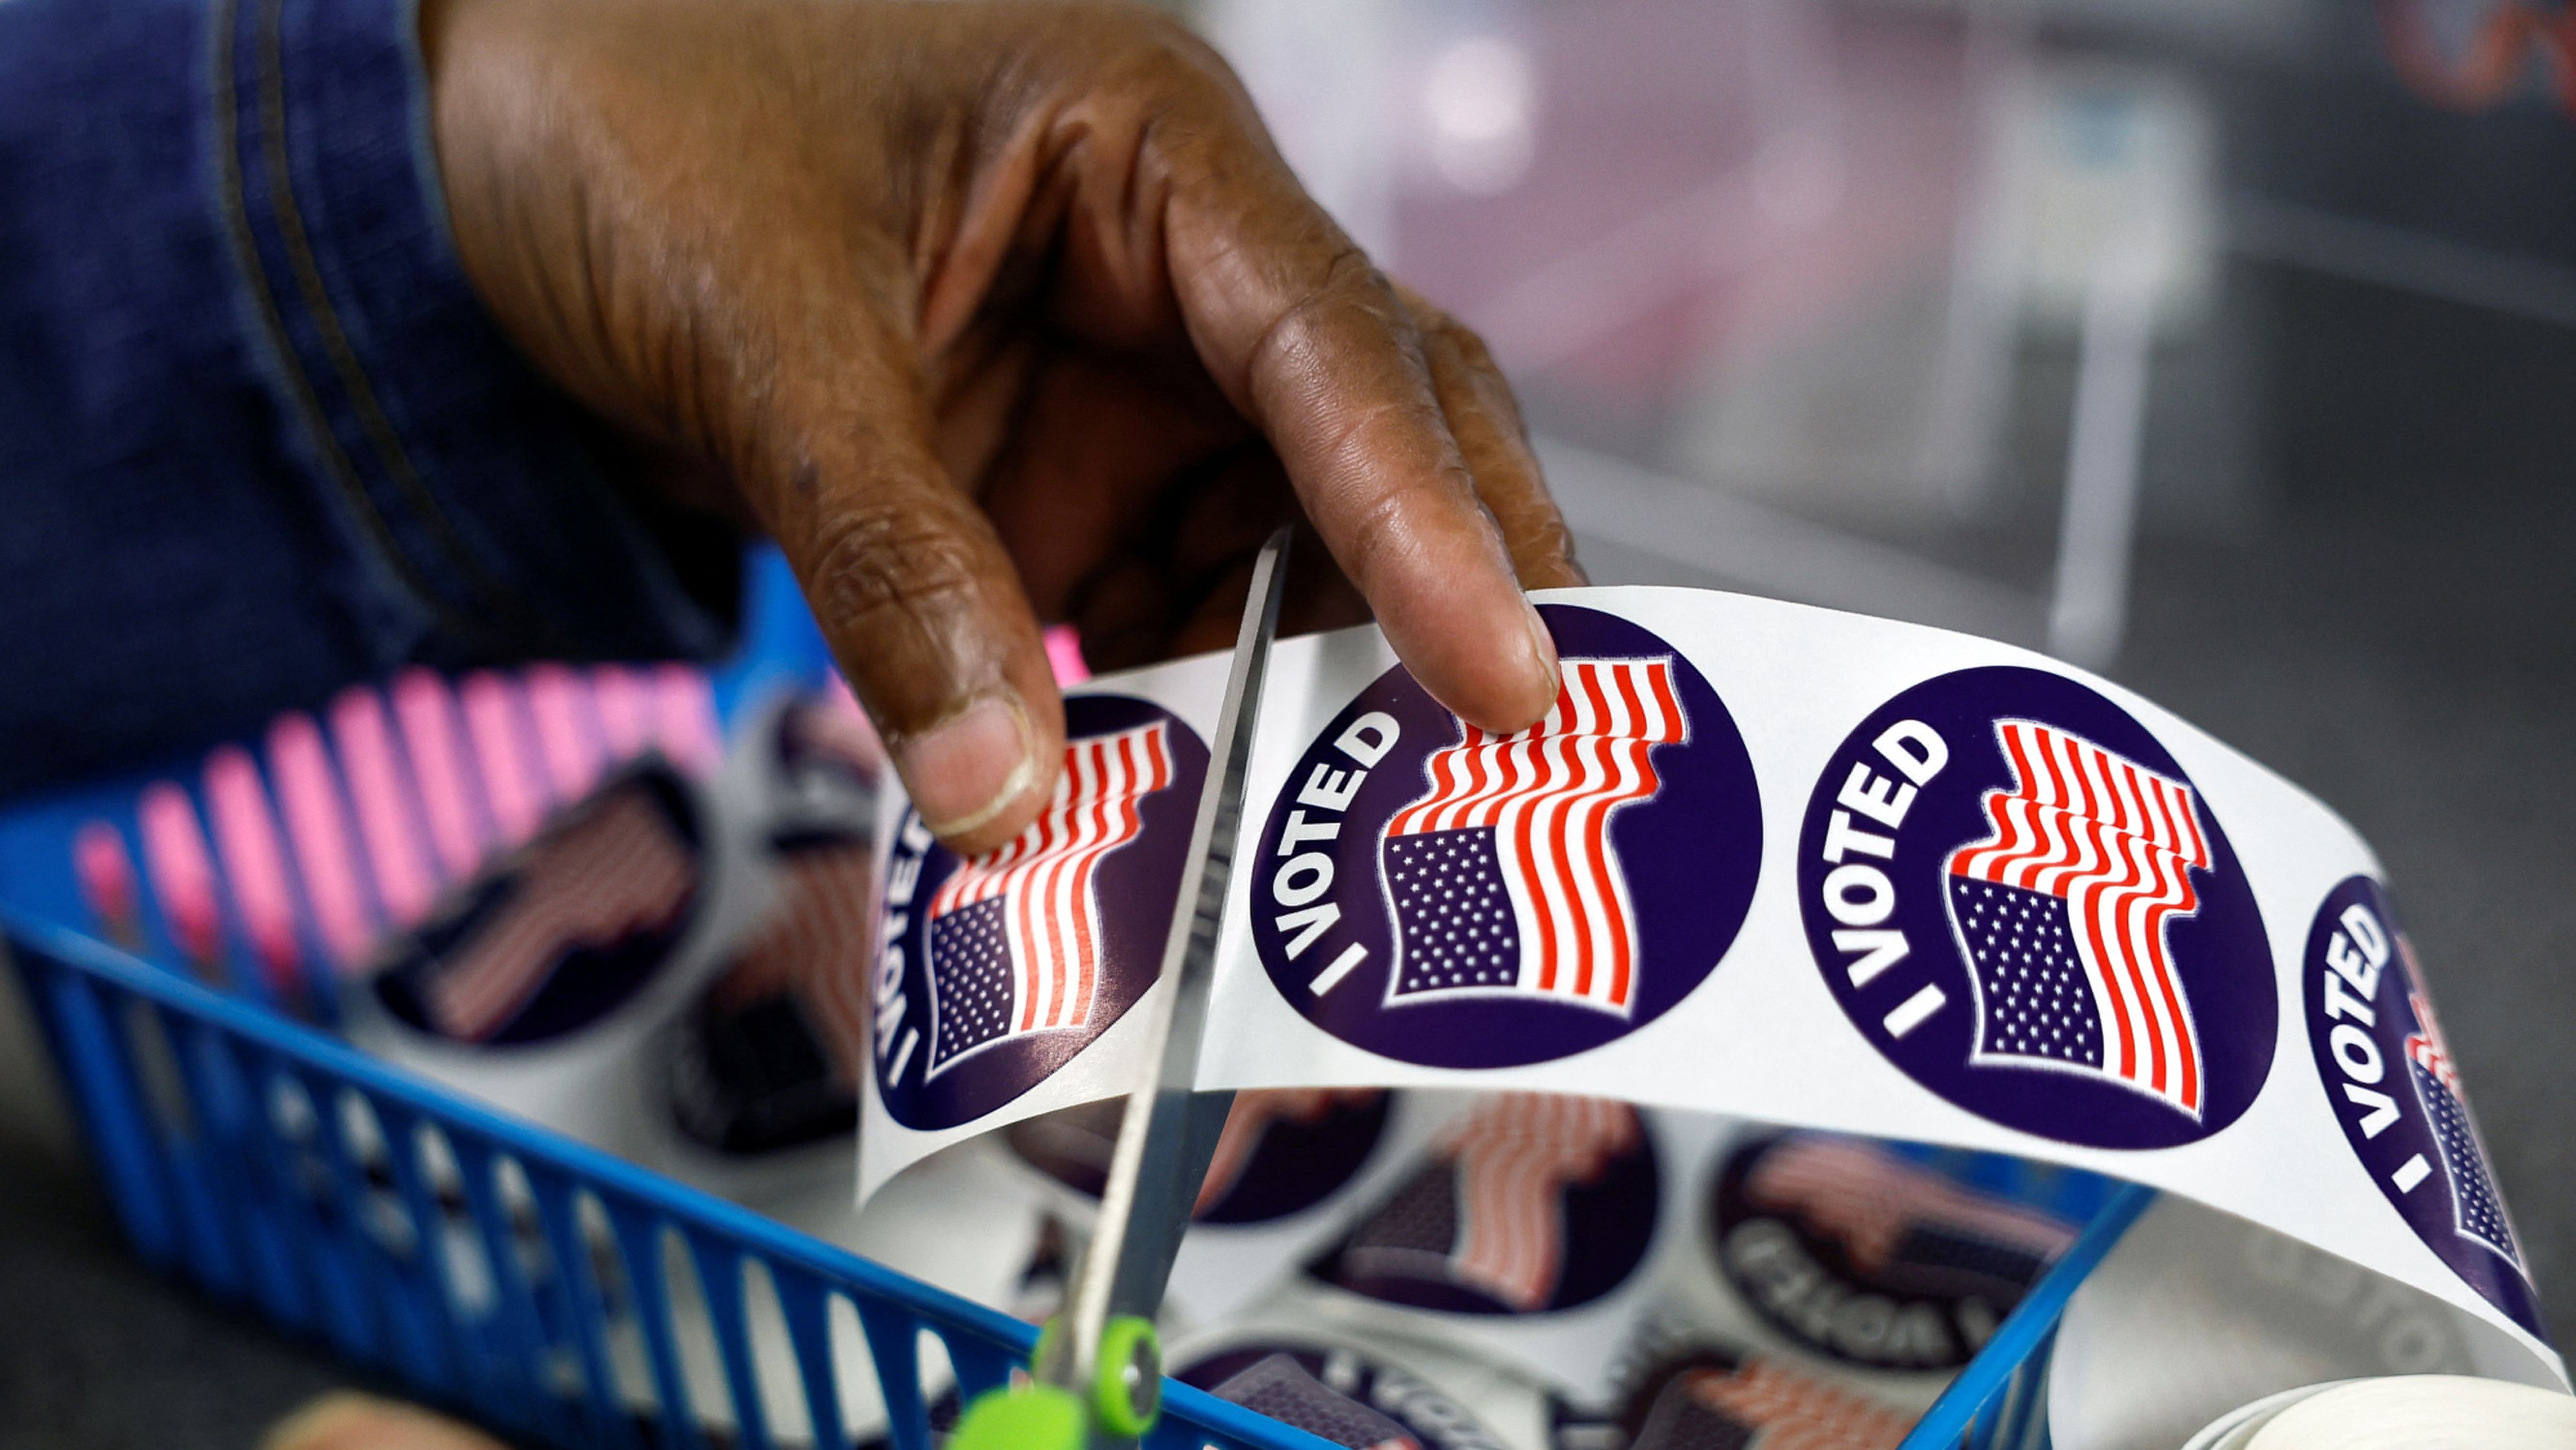 A poll worker prepares "I voted" stickers for voters at the City Clerk's Office ahead of the midterm election in Lansing, Michigan, U.S., November 7, 2022.